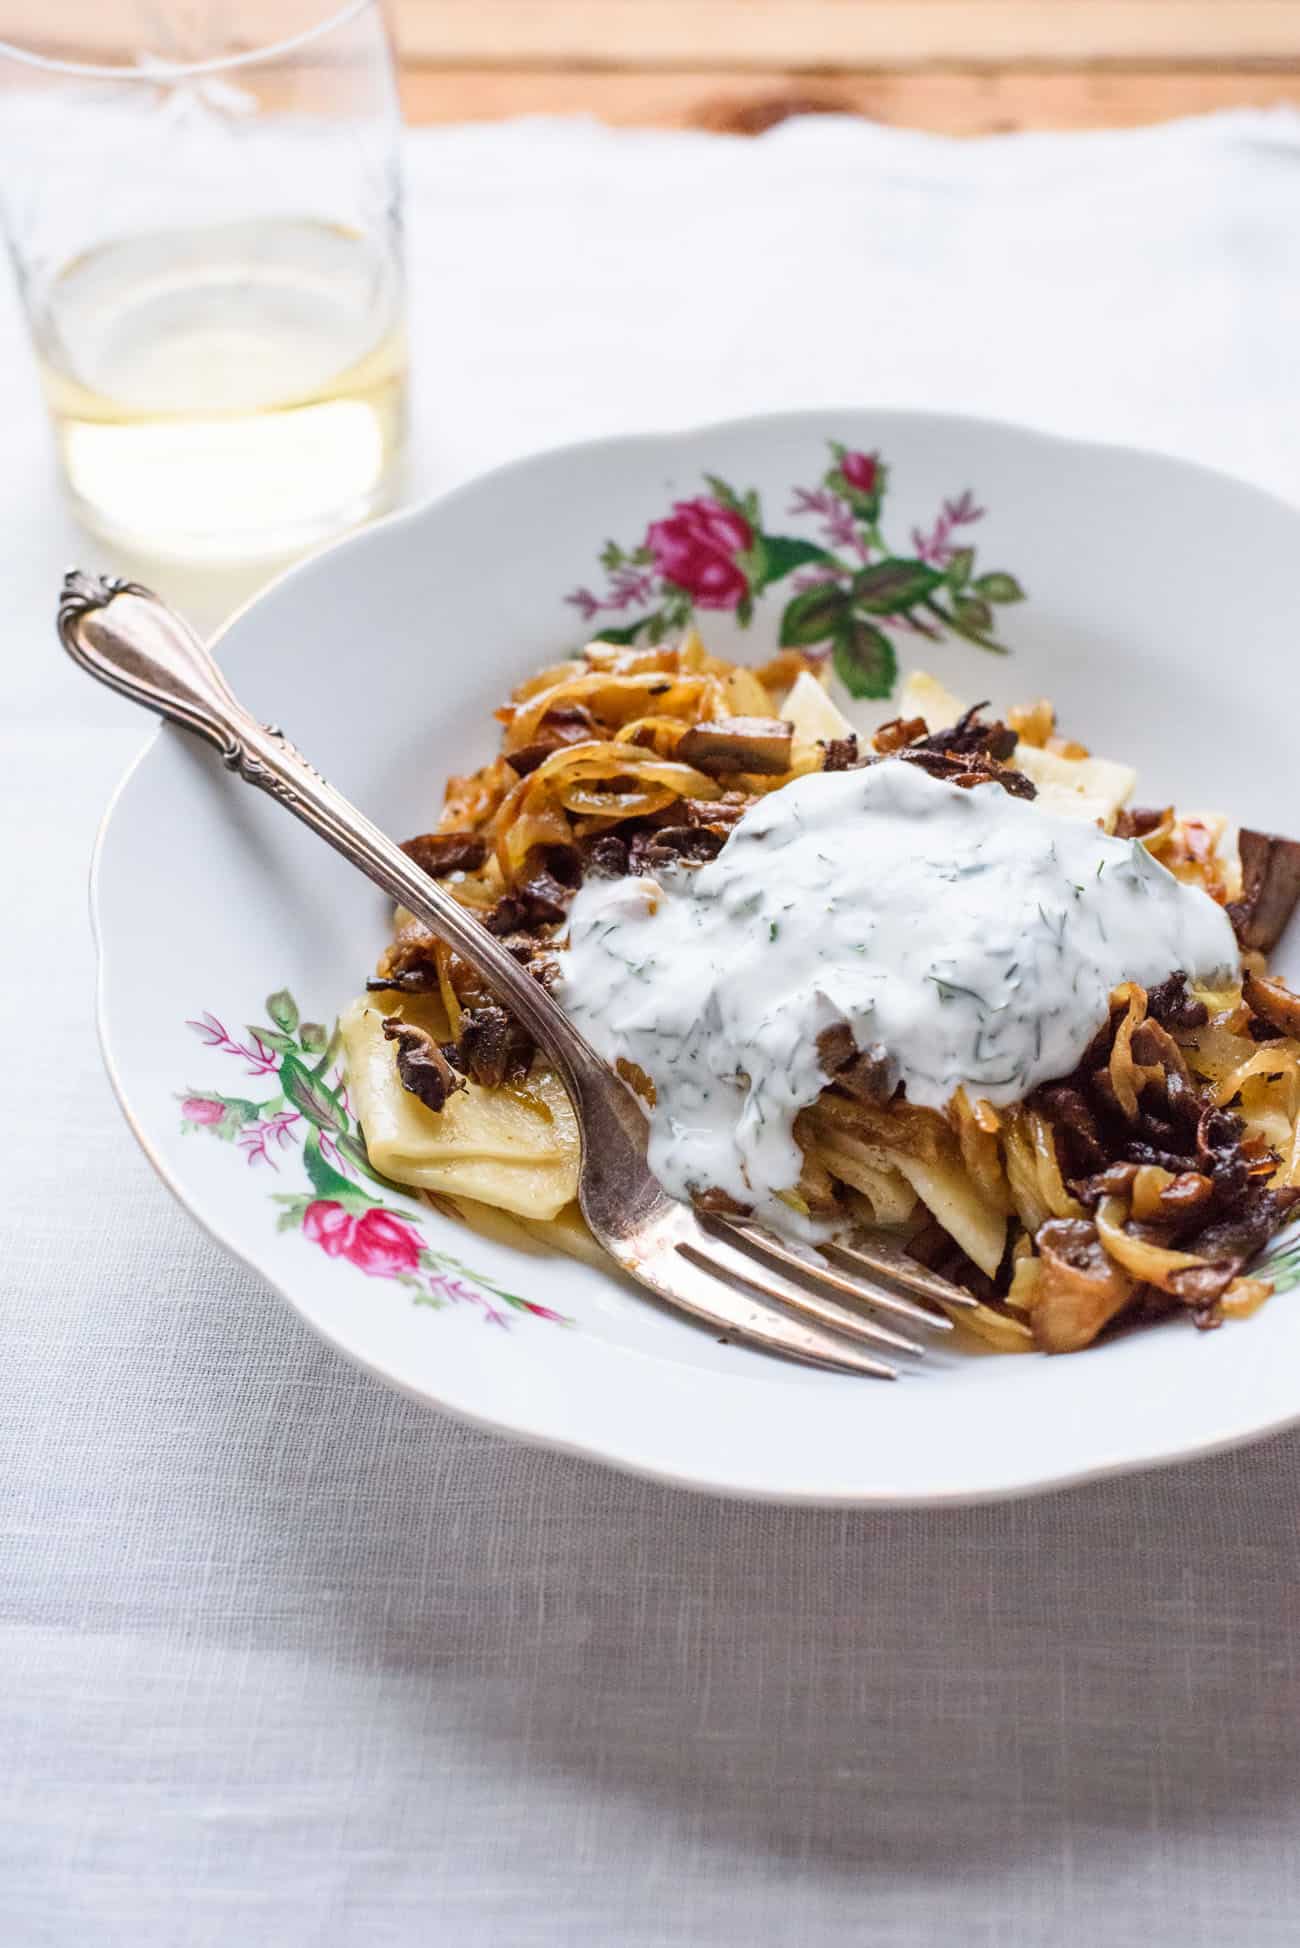 Azerbaijani cuisine: Khingal (handmade noodles) | Noodles with mushrooms and caramelized onions on a floral plate on a white tablecloth